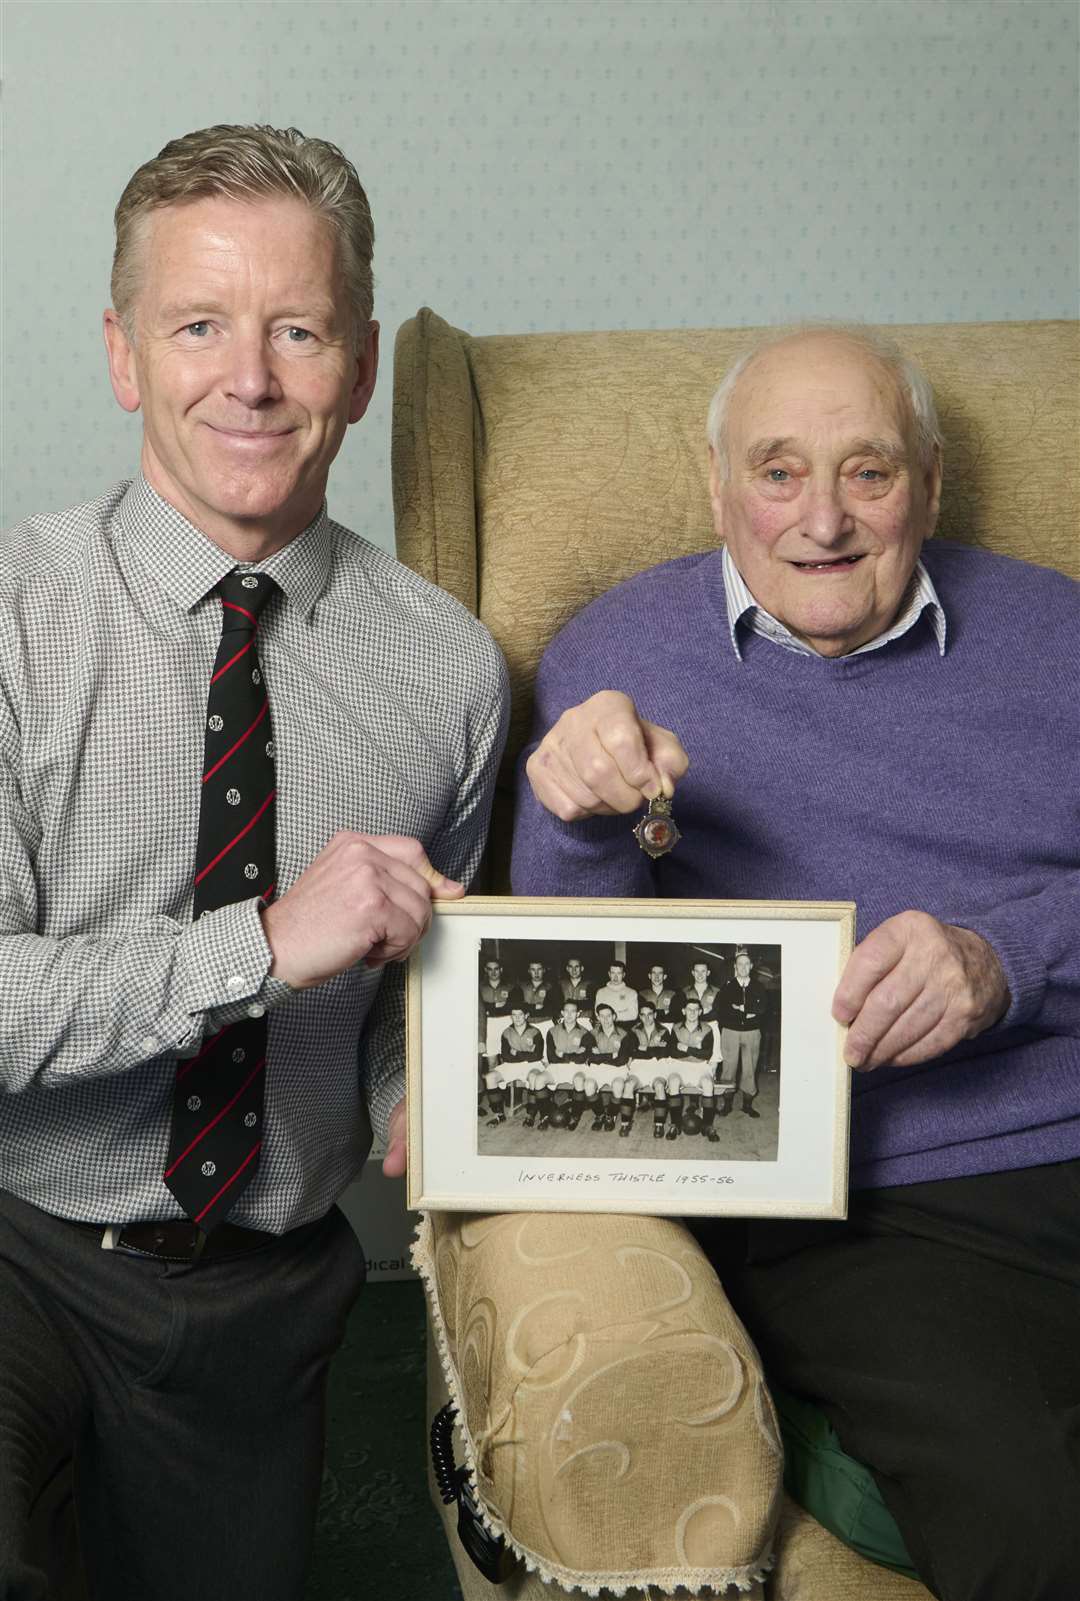 Former Inverness Thistle right-back Gordon Inkster, who has died aged 90, recently shared stories with Inverness Caley Thistle legend Charlie Christie.